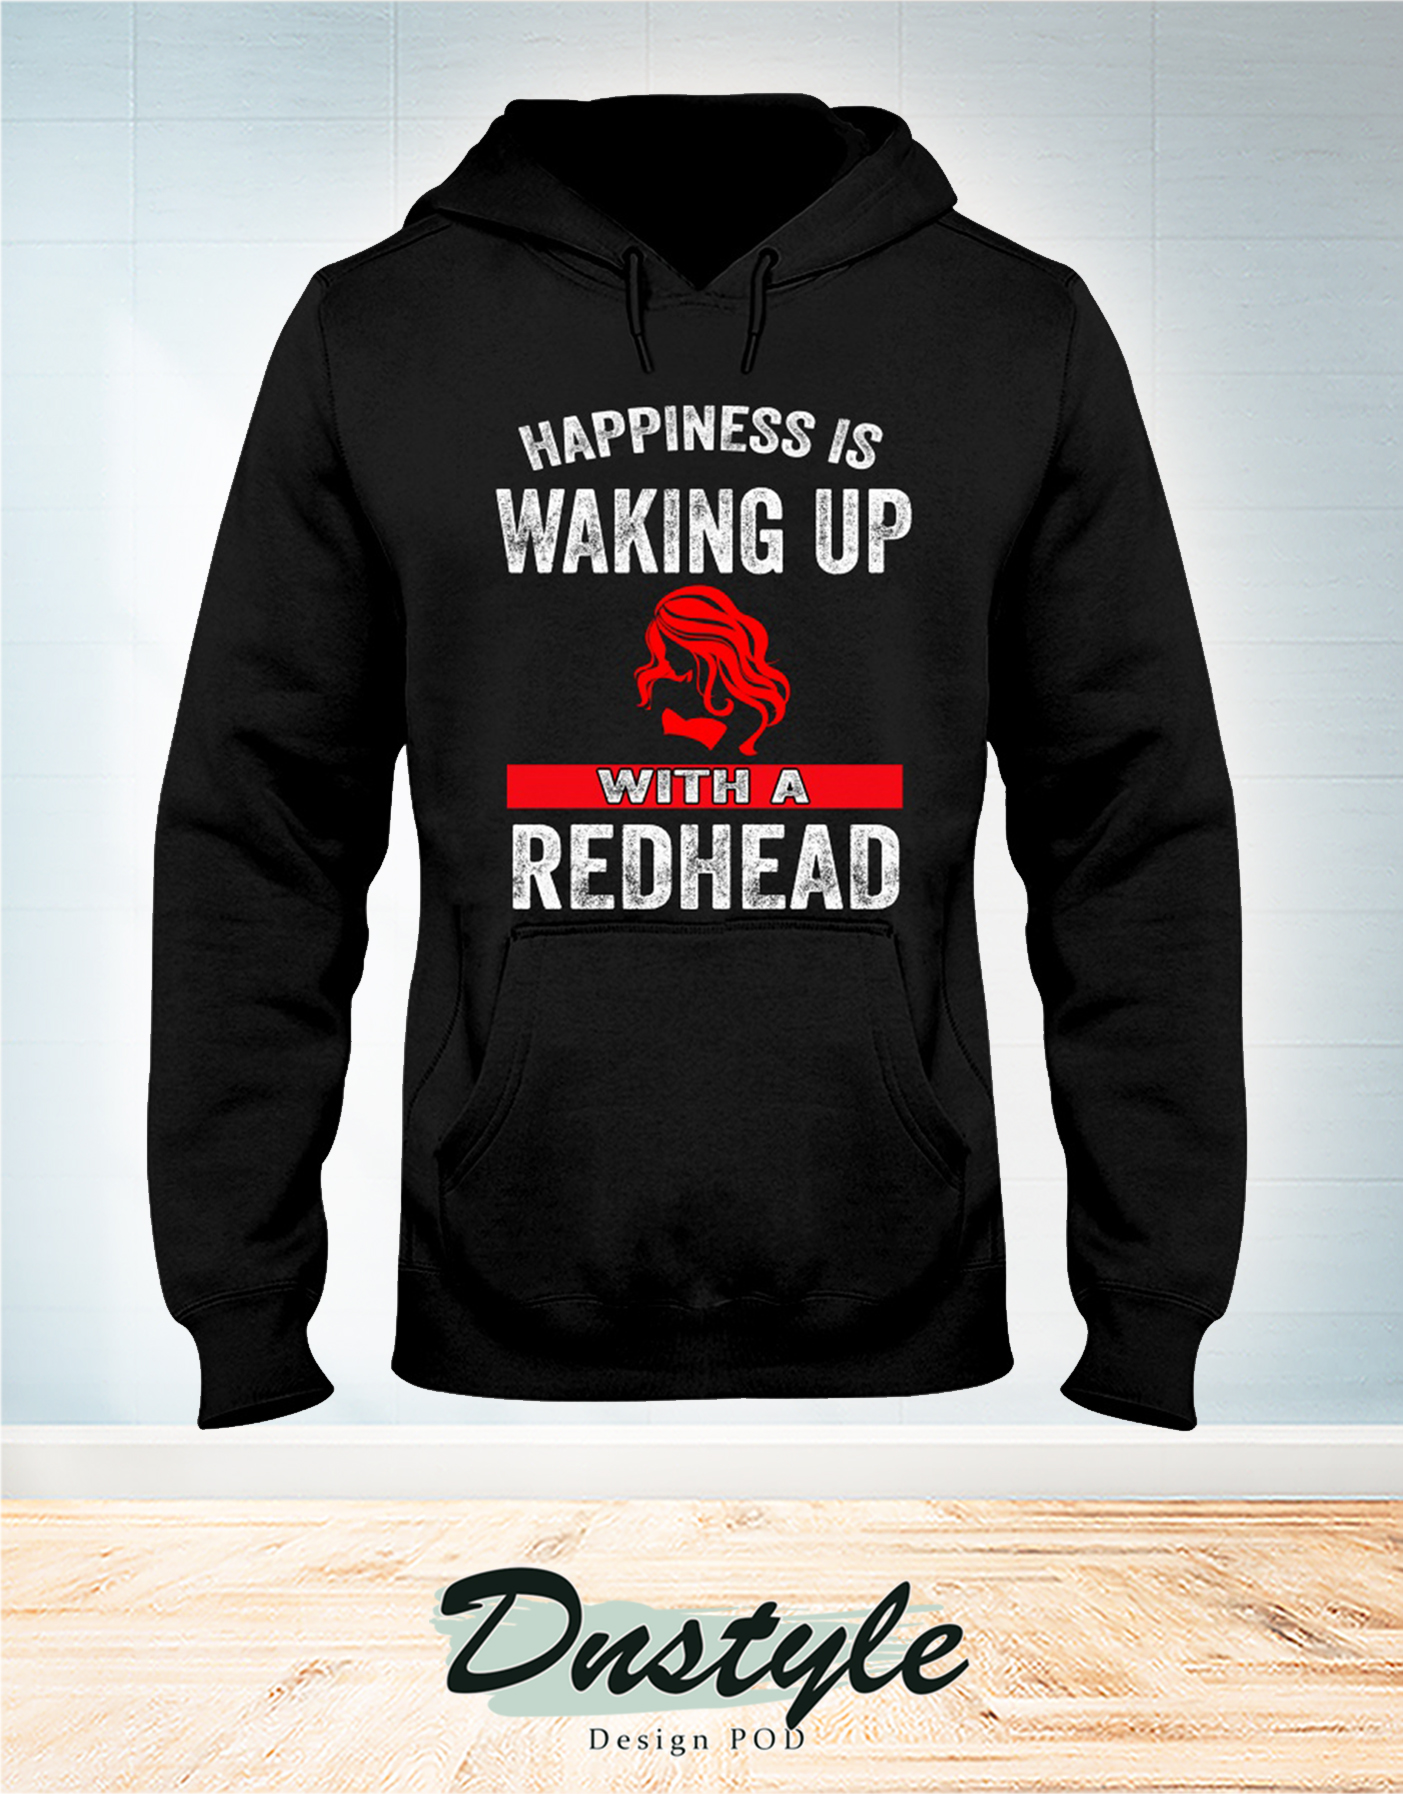 Happiness is waking up with a redhead hoodie